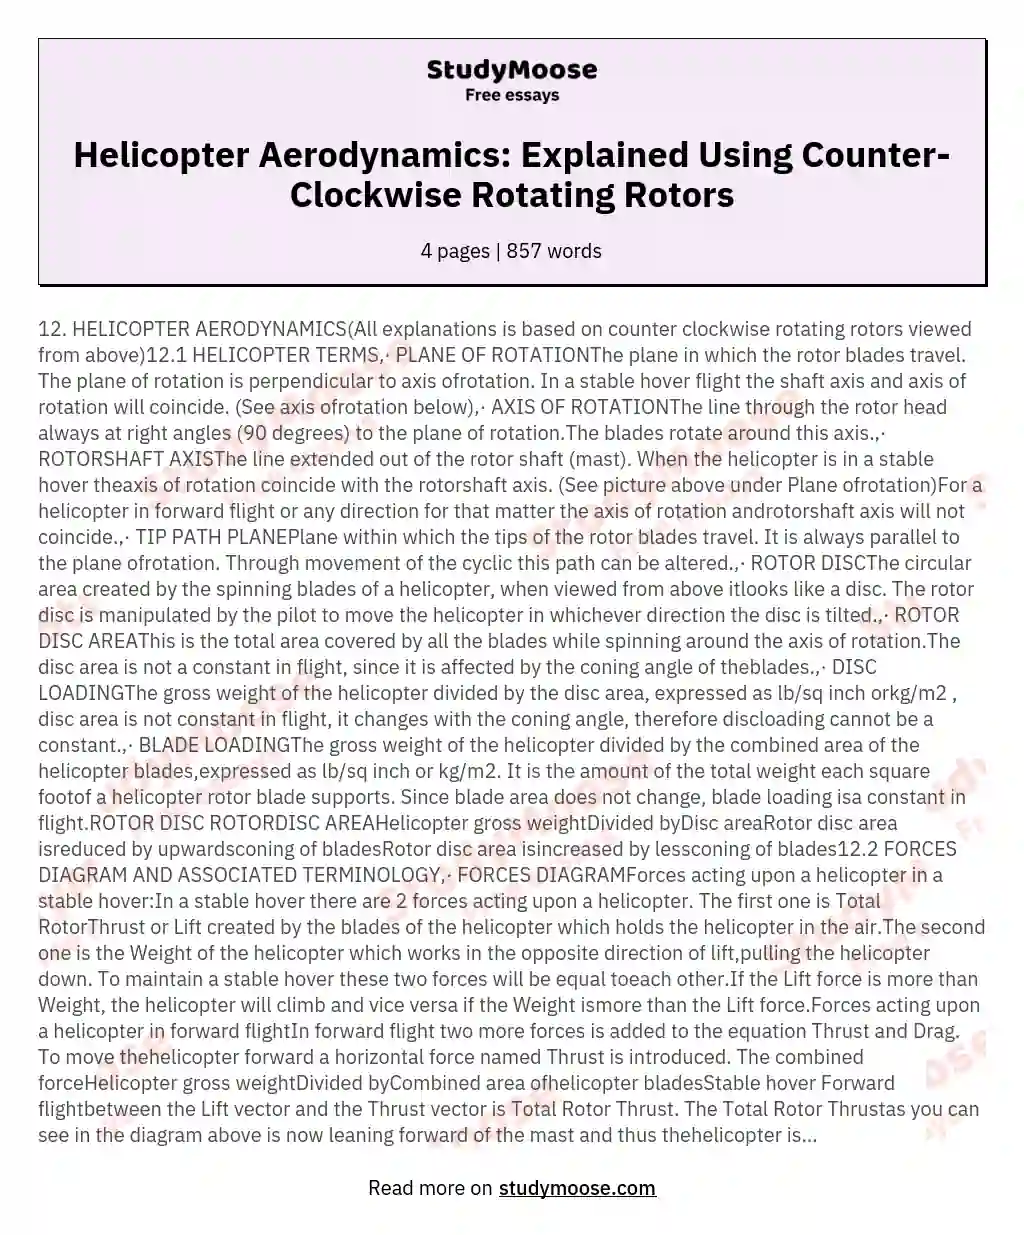 HELICOPTER AERODYNAMICSAll explanations is based on counter clockwise rotating rotors viewed